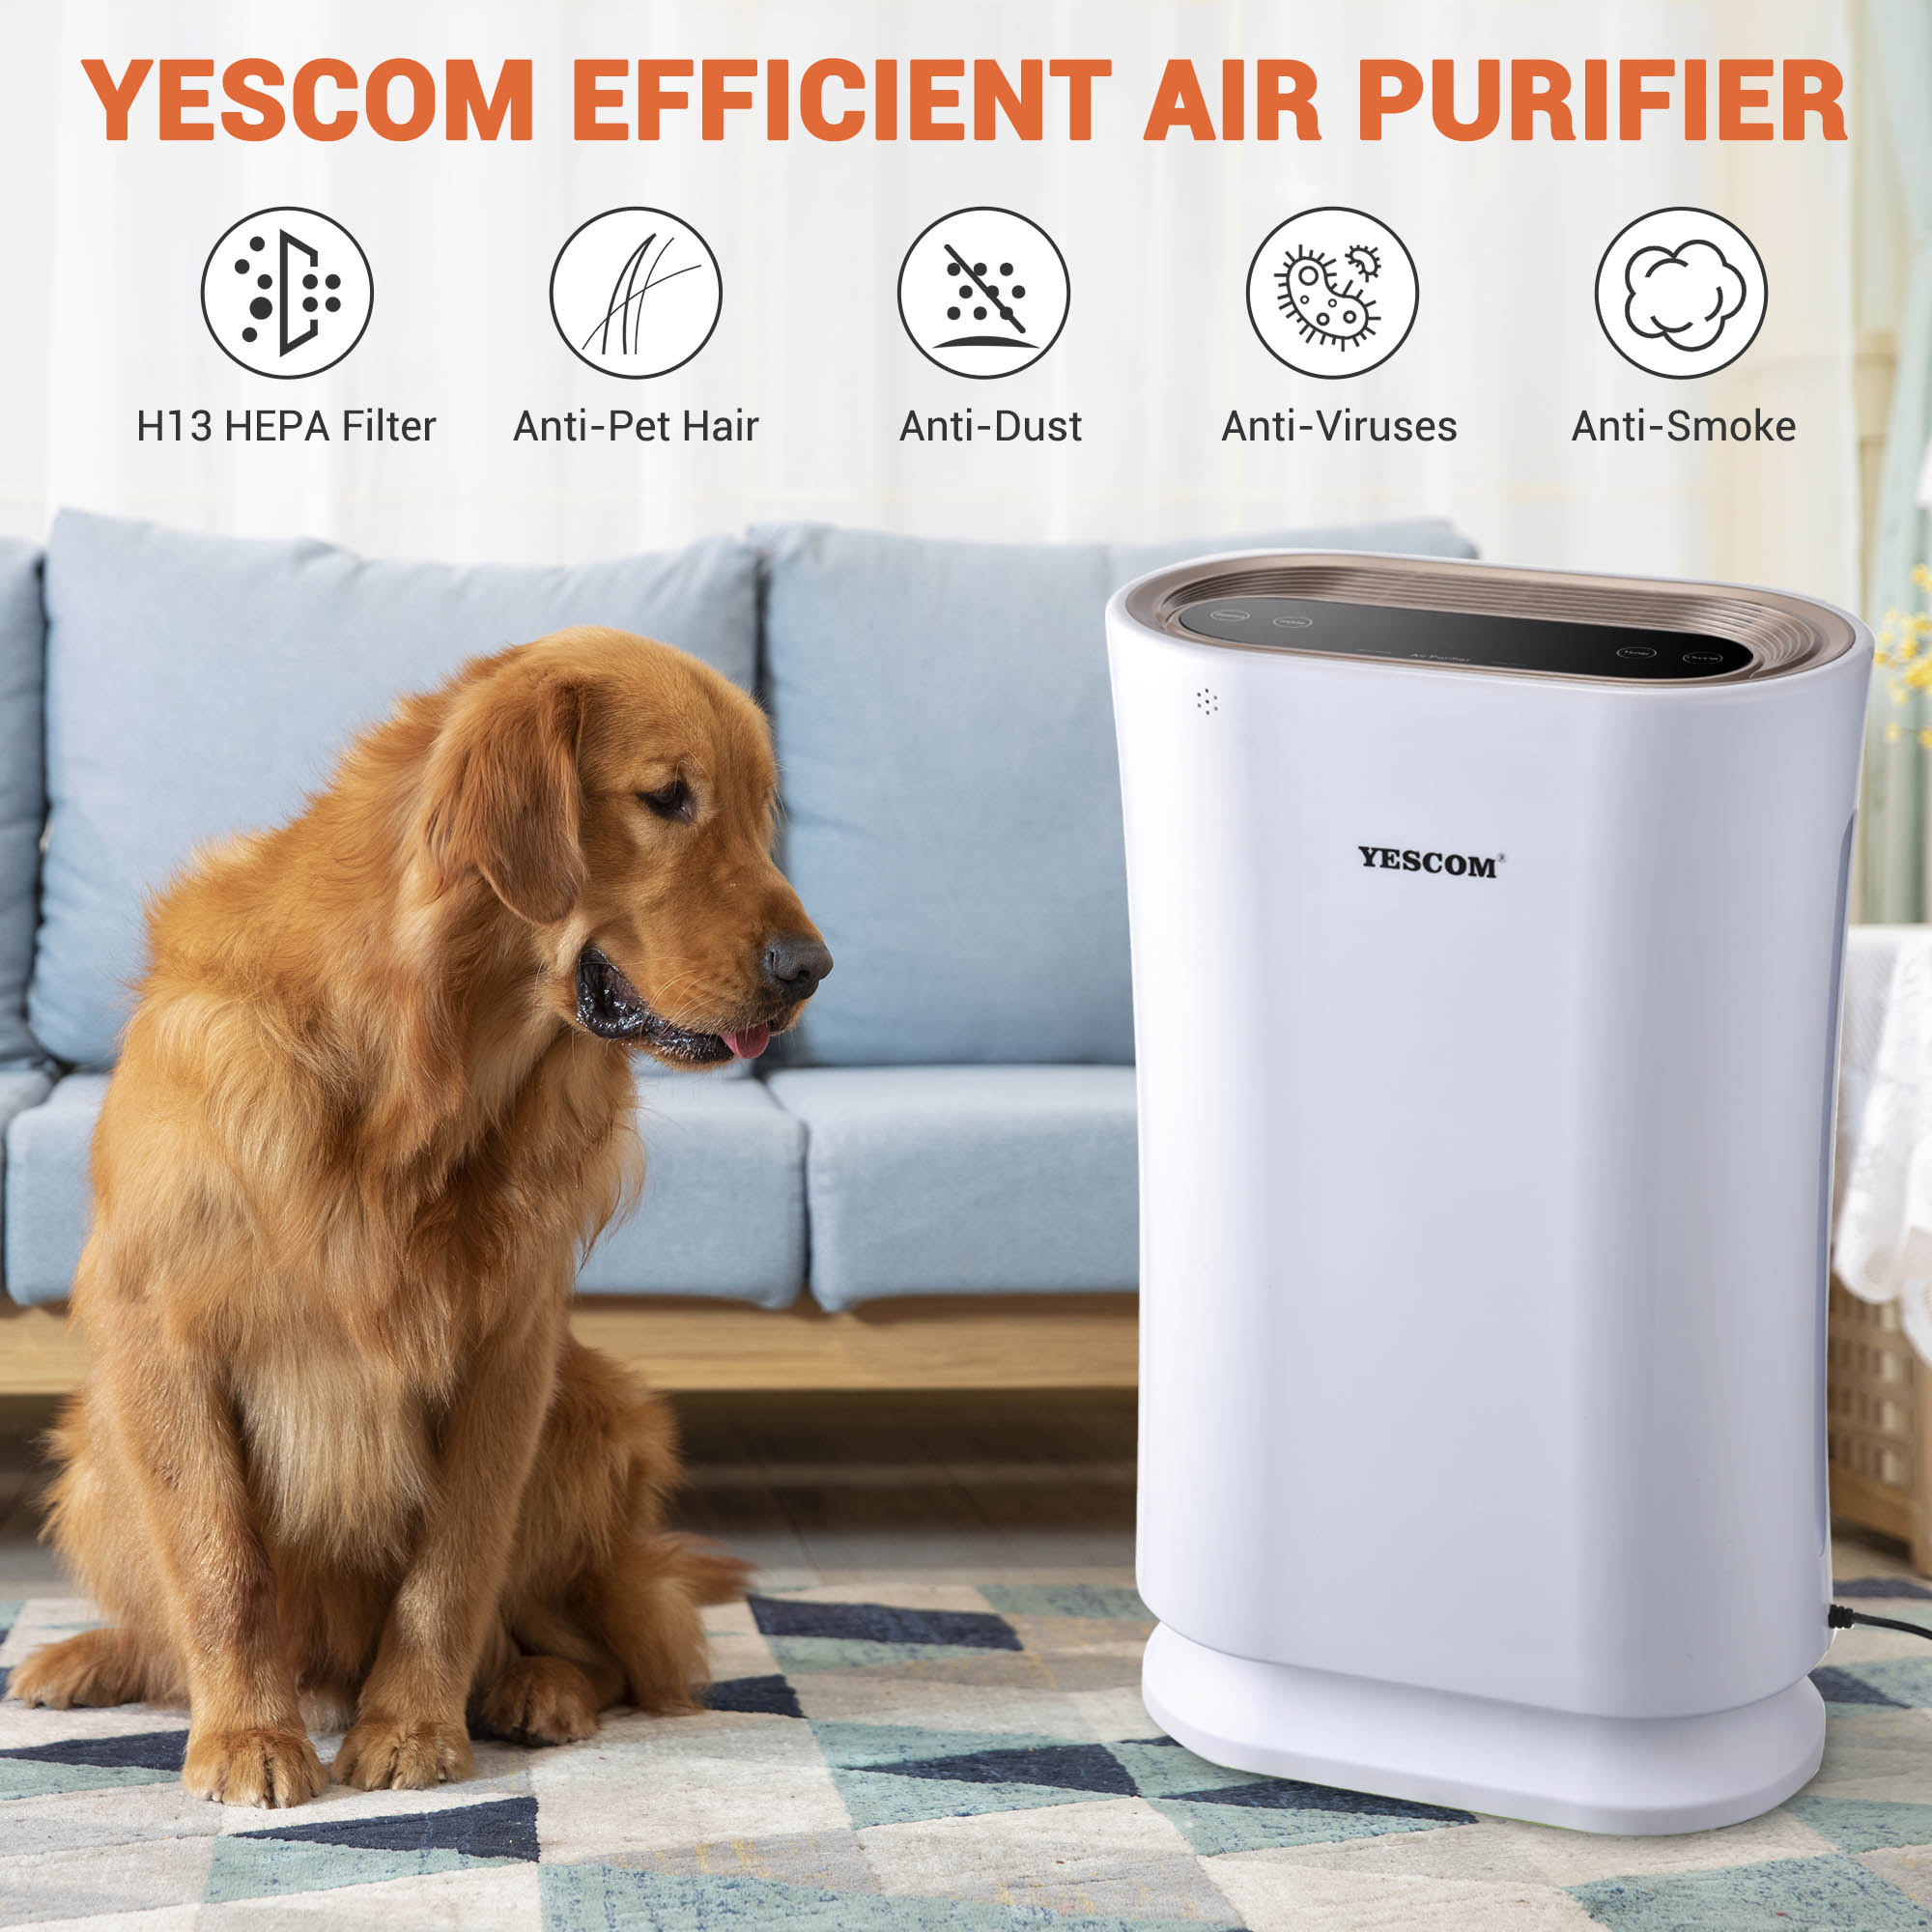 Yescom 35W 4 in 1 Air Purifier with HEPA Filter UV-C Sanitizer for Pollen Odor Dust